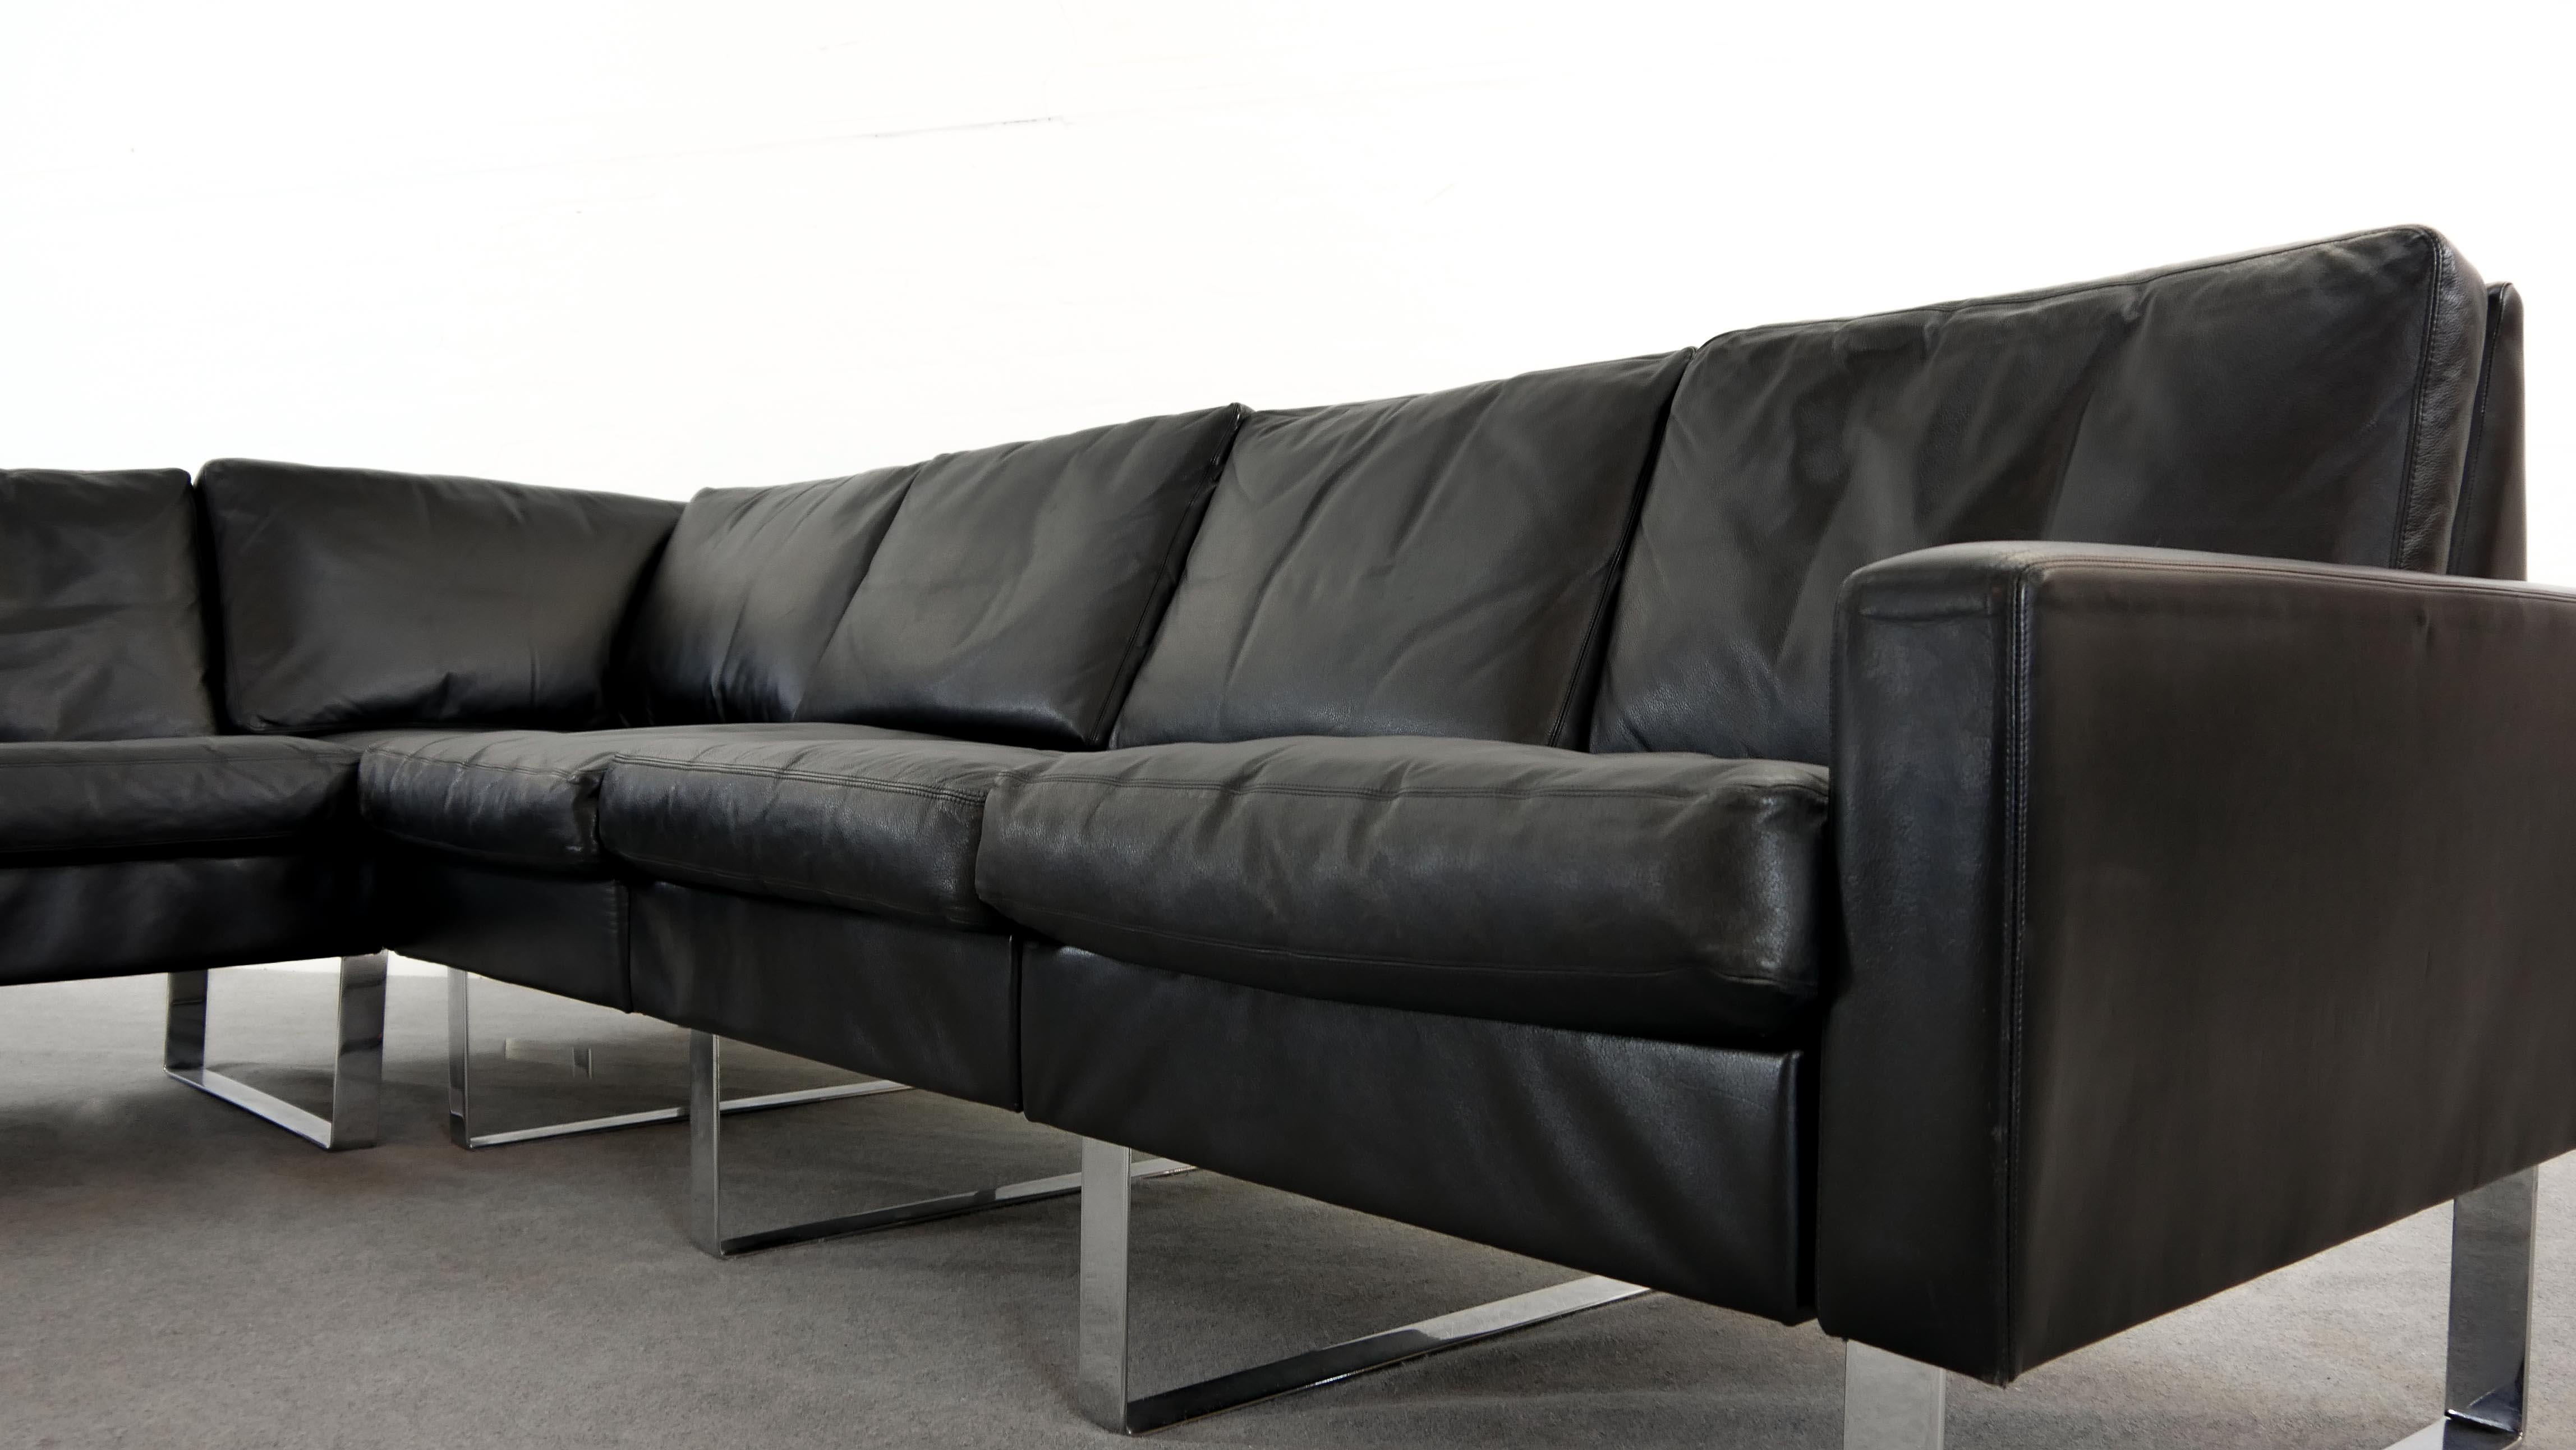 Mid-Century Modern Sectional Modular Conseta Sofa on Runners by COR, Germany in Black Leather 